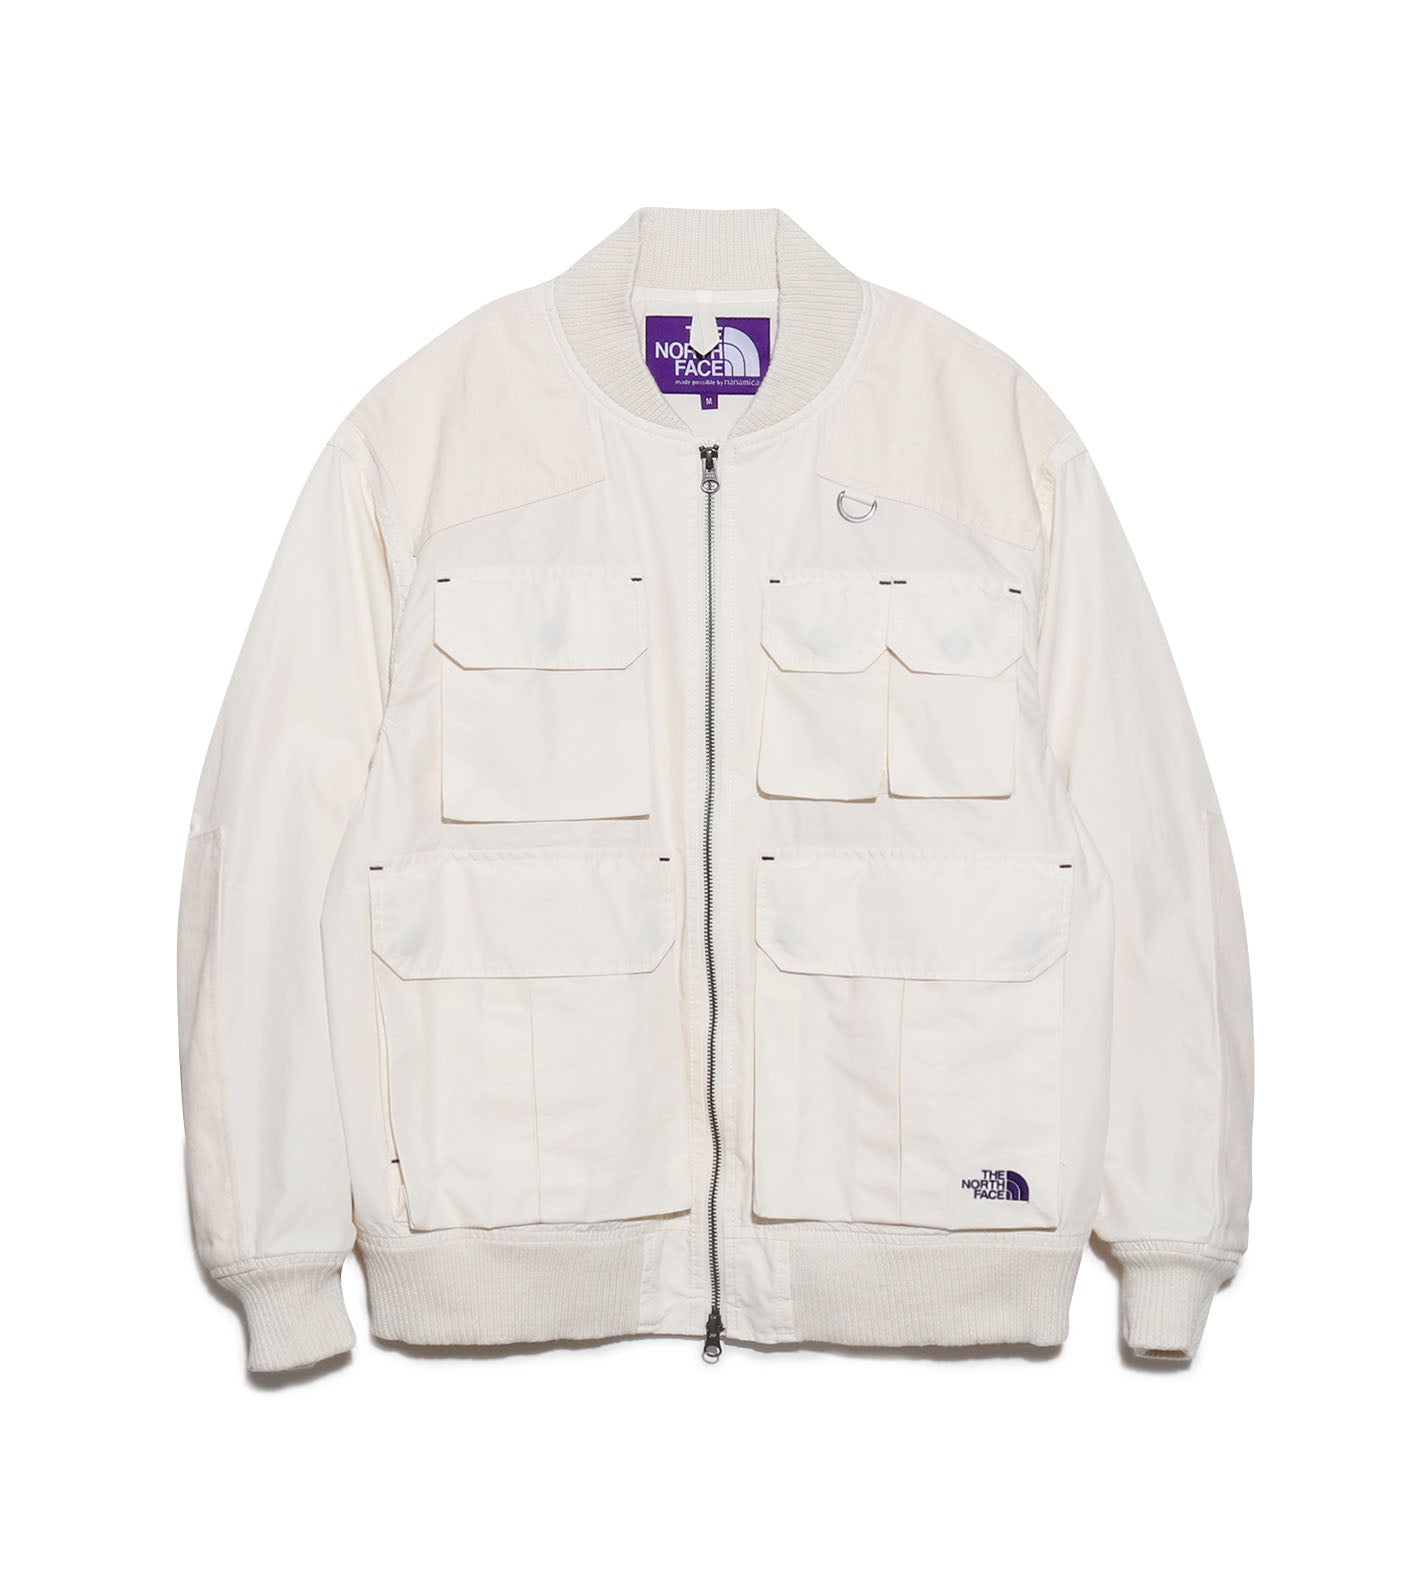 THE NORTH FACE PURPLE LABEL Stroll Field Jacket